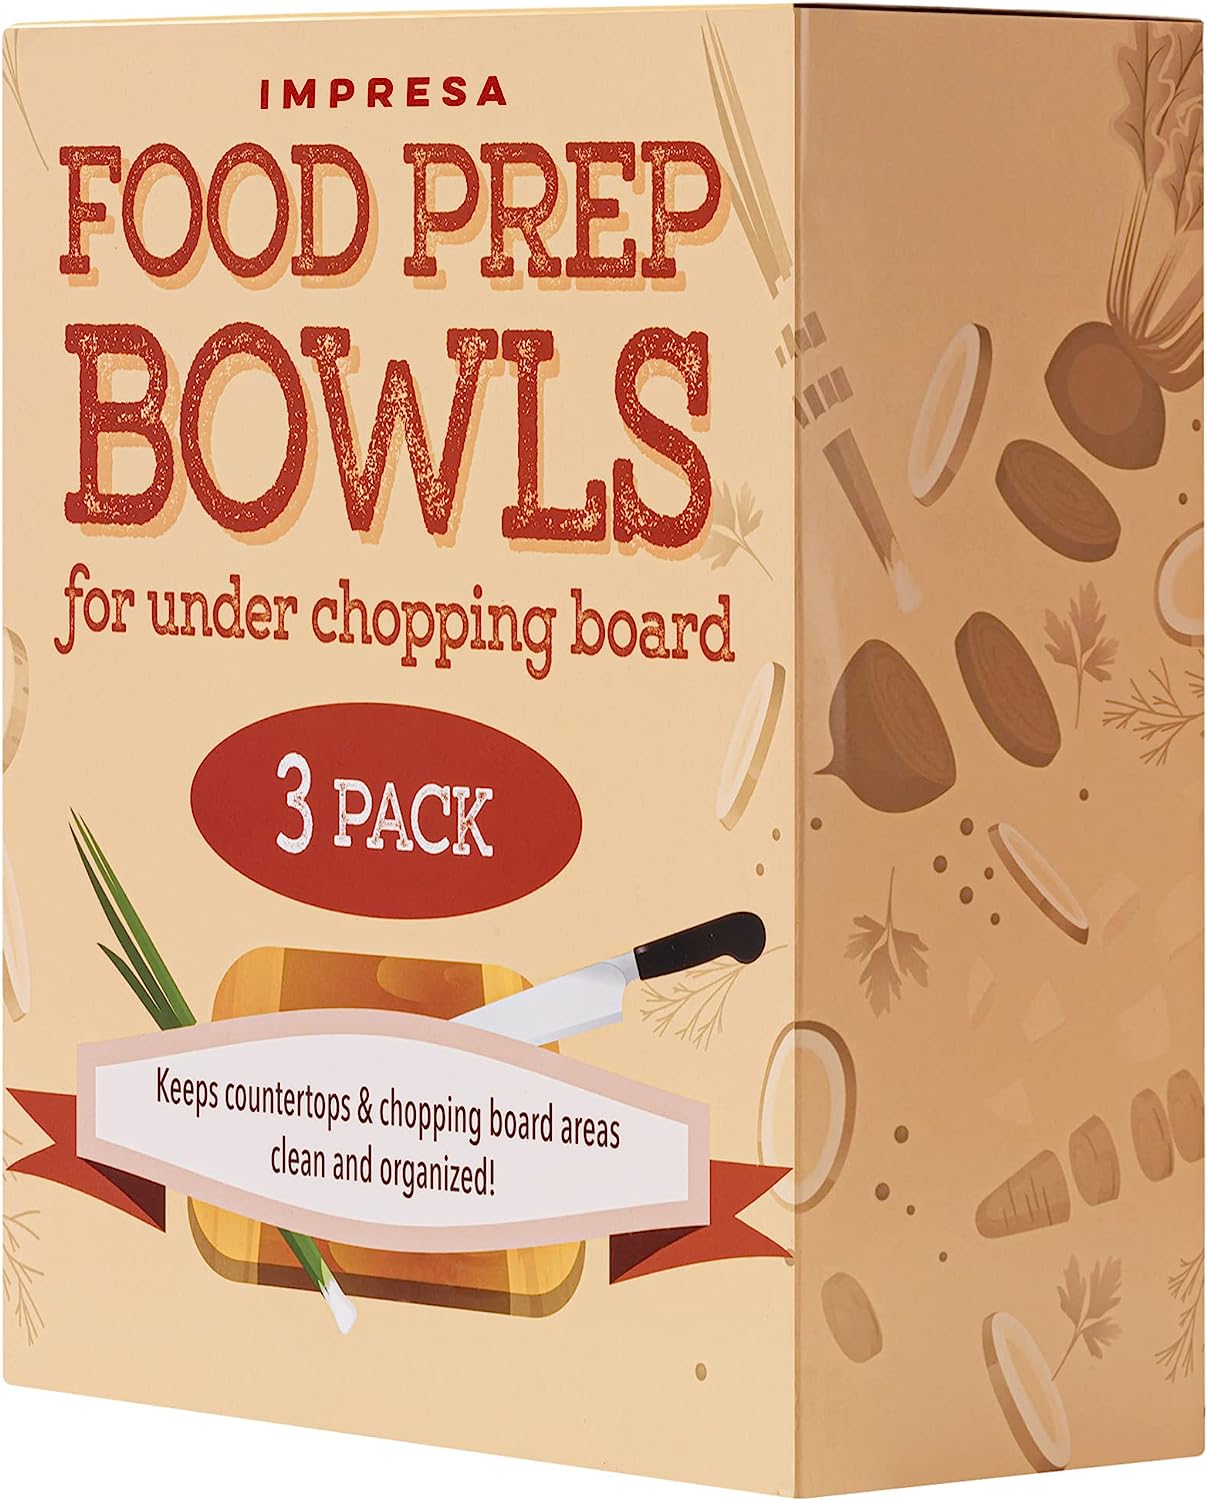 3 Pack] Food Prep Bowls for Under Chopping Board – Impresa Products